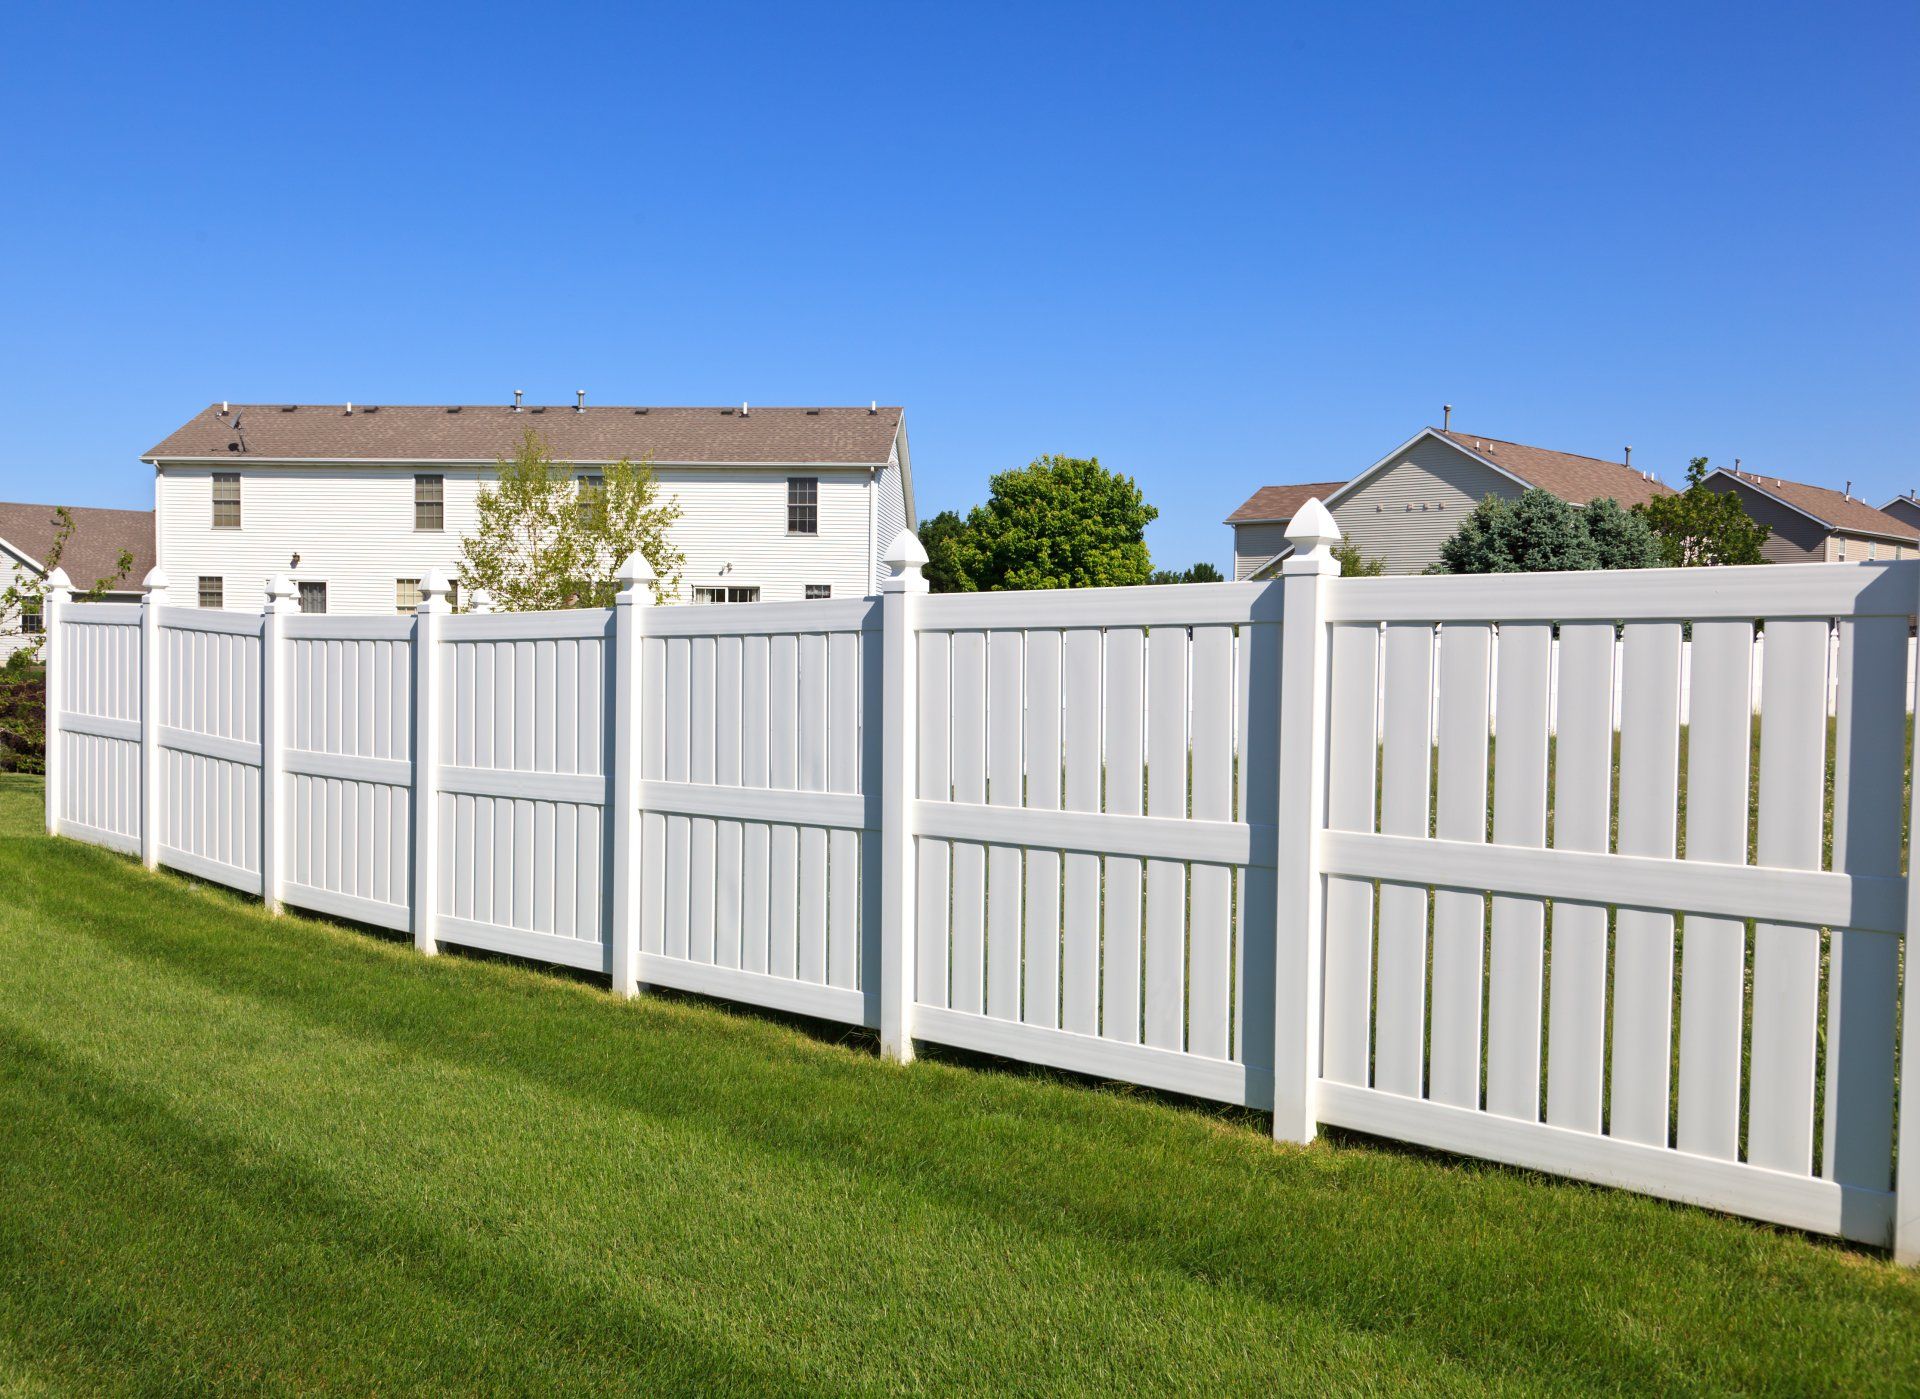 We install install high-quality fencing, posts and gates for all types of properties